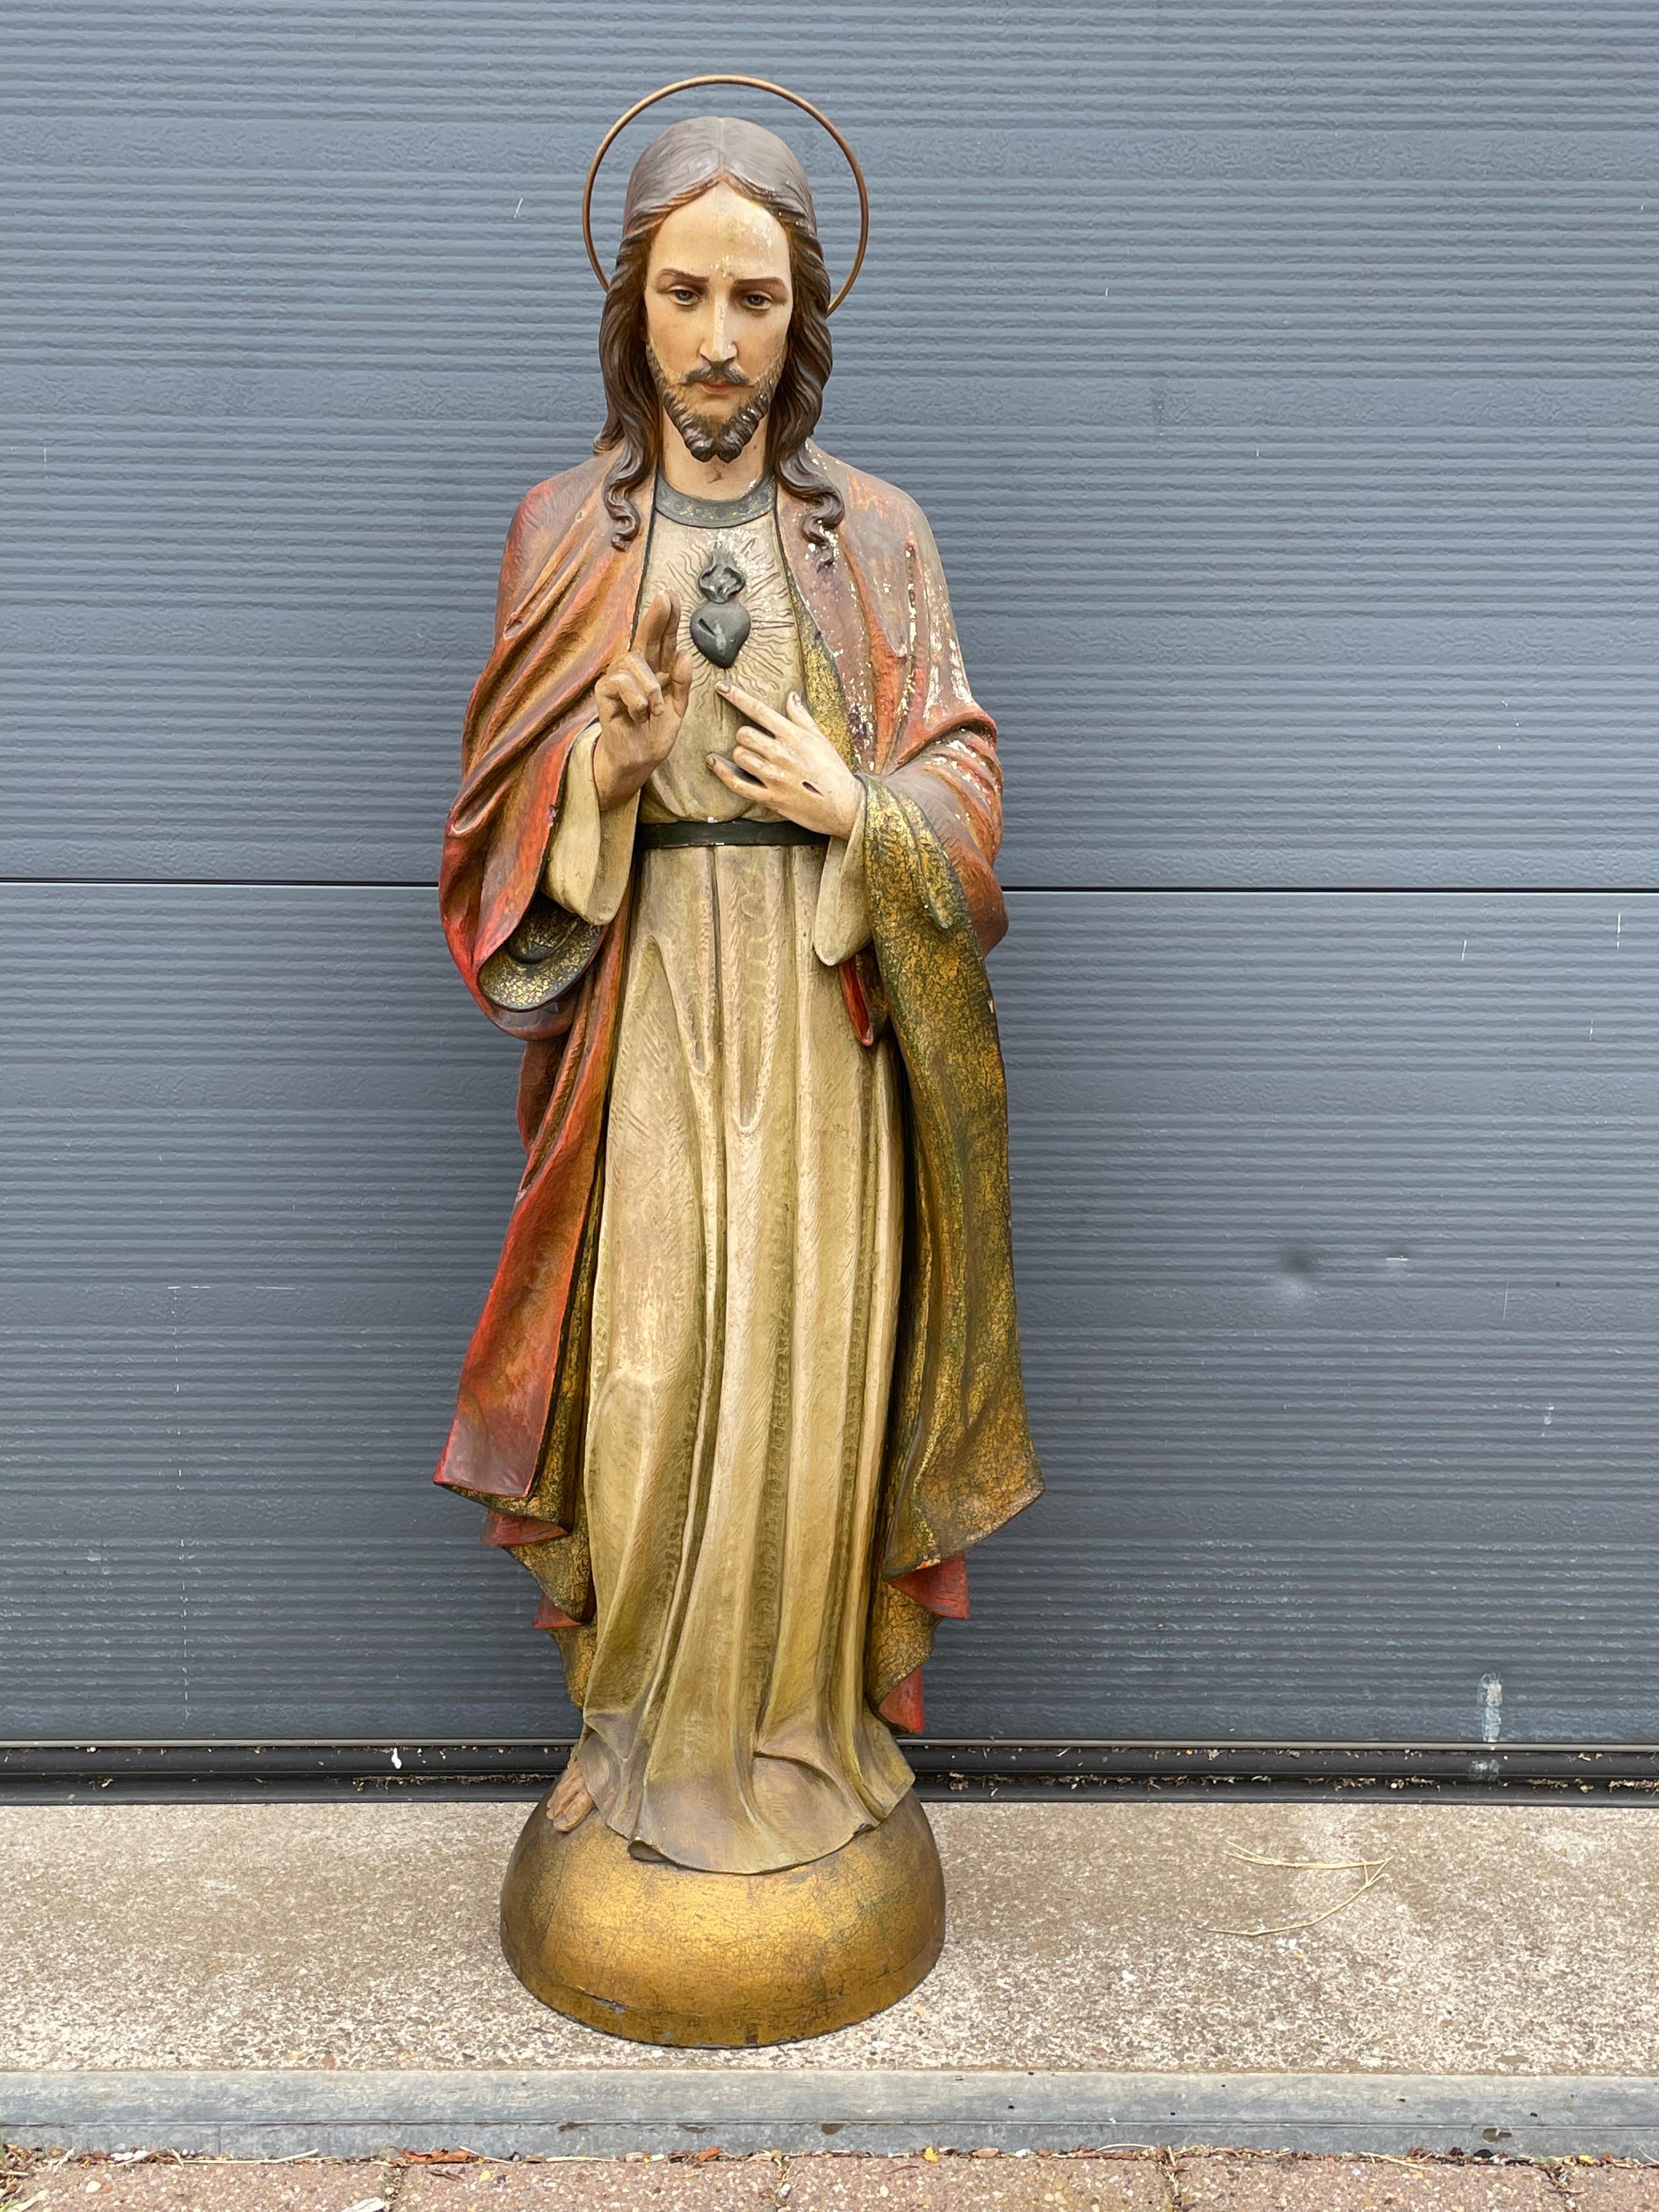 Antique & Rare Hand Painted Plaster, Church Sculpture or Statue of Jesus Christ For Sale 9